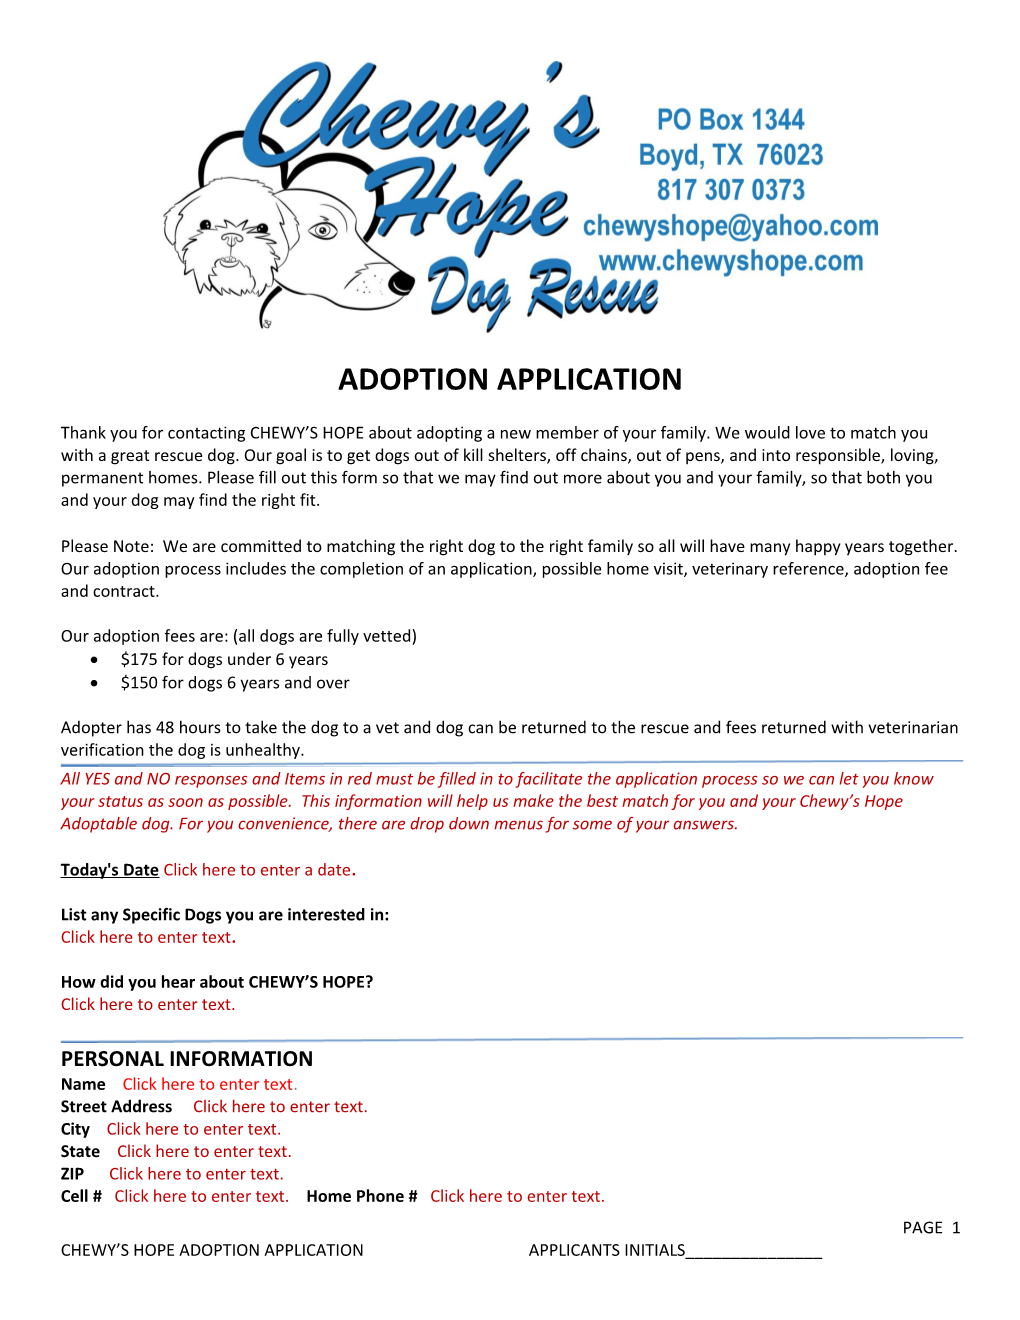 Our Adoption Fees Are: (All Dogs Are Fully Vetted)